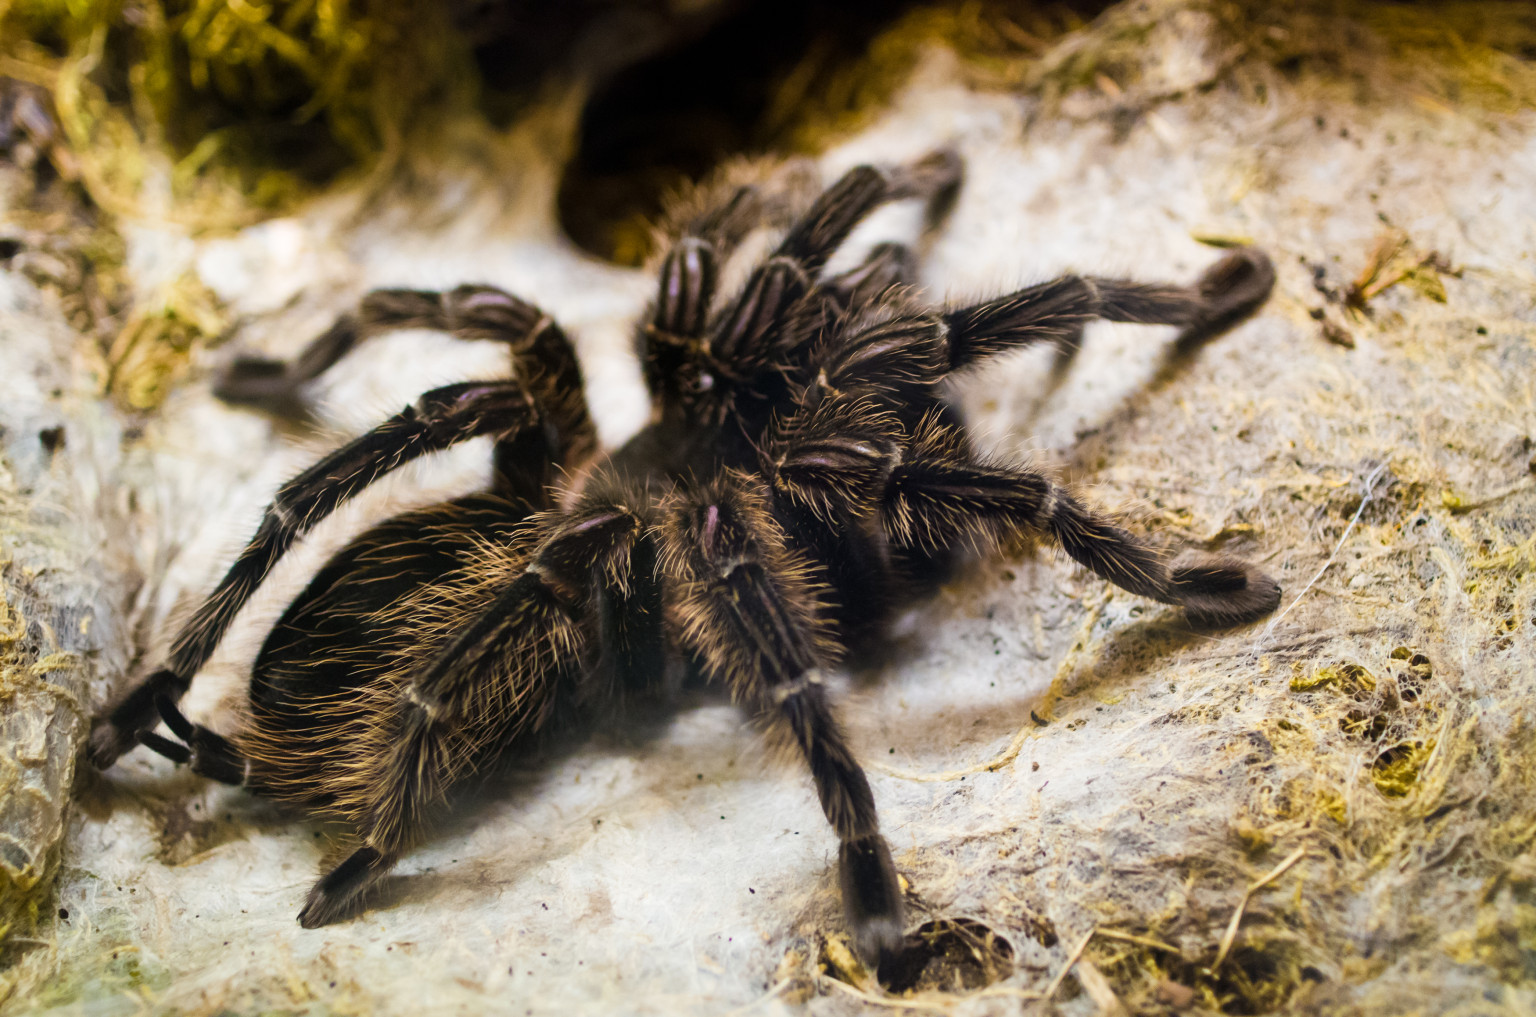 Scary Spider HD Desktop Wallpaper We Select The Best